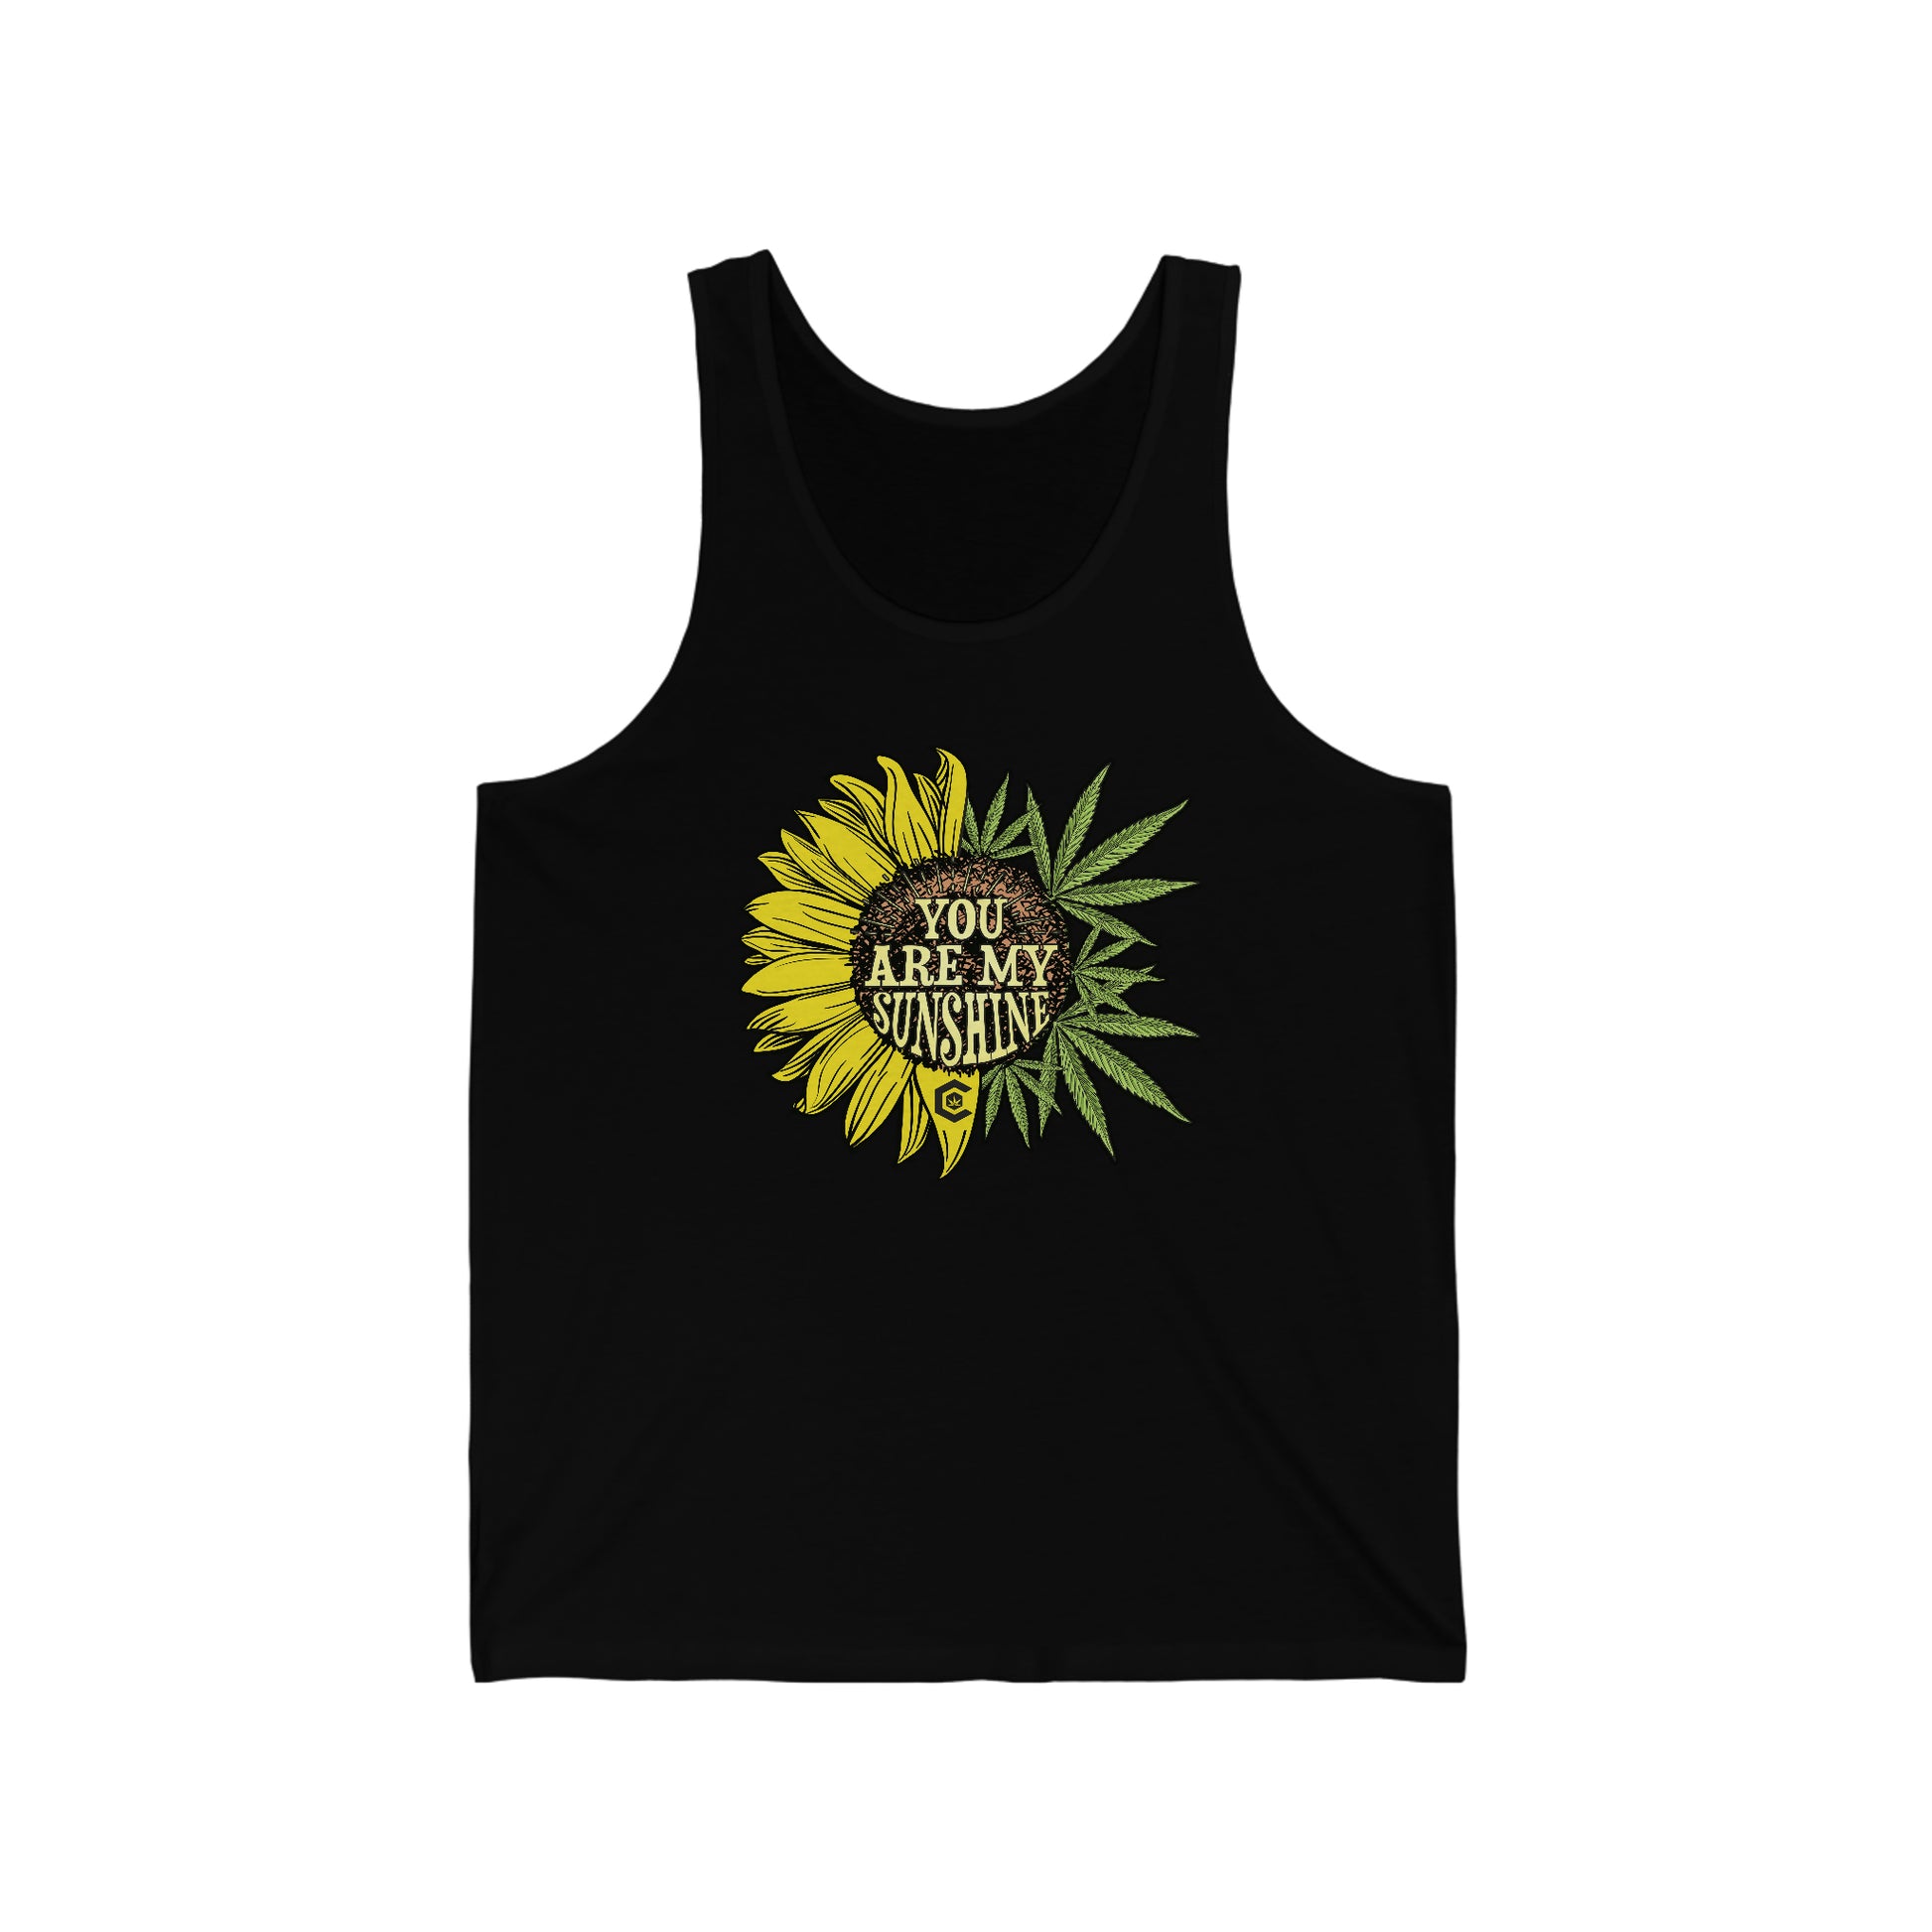 a black You Are My Sunshine weed tank top with a sunflower on it.